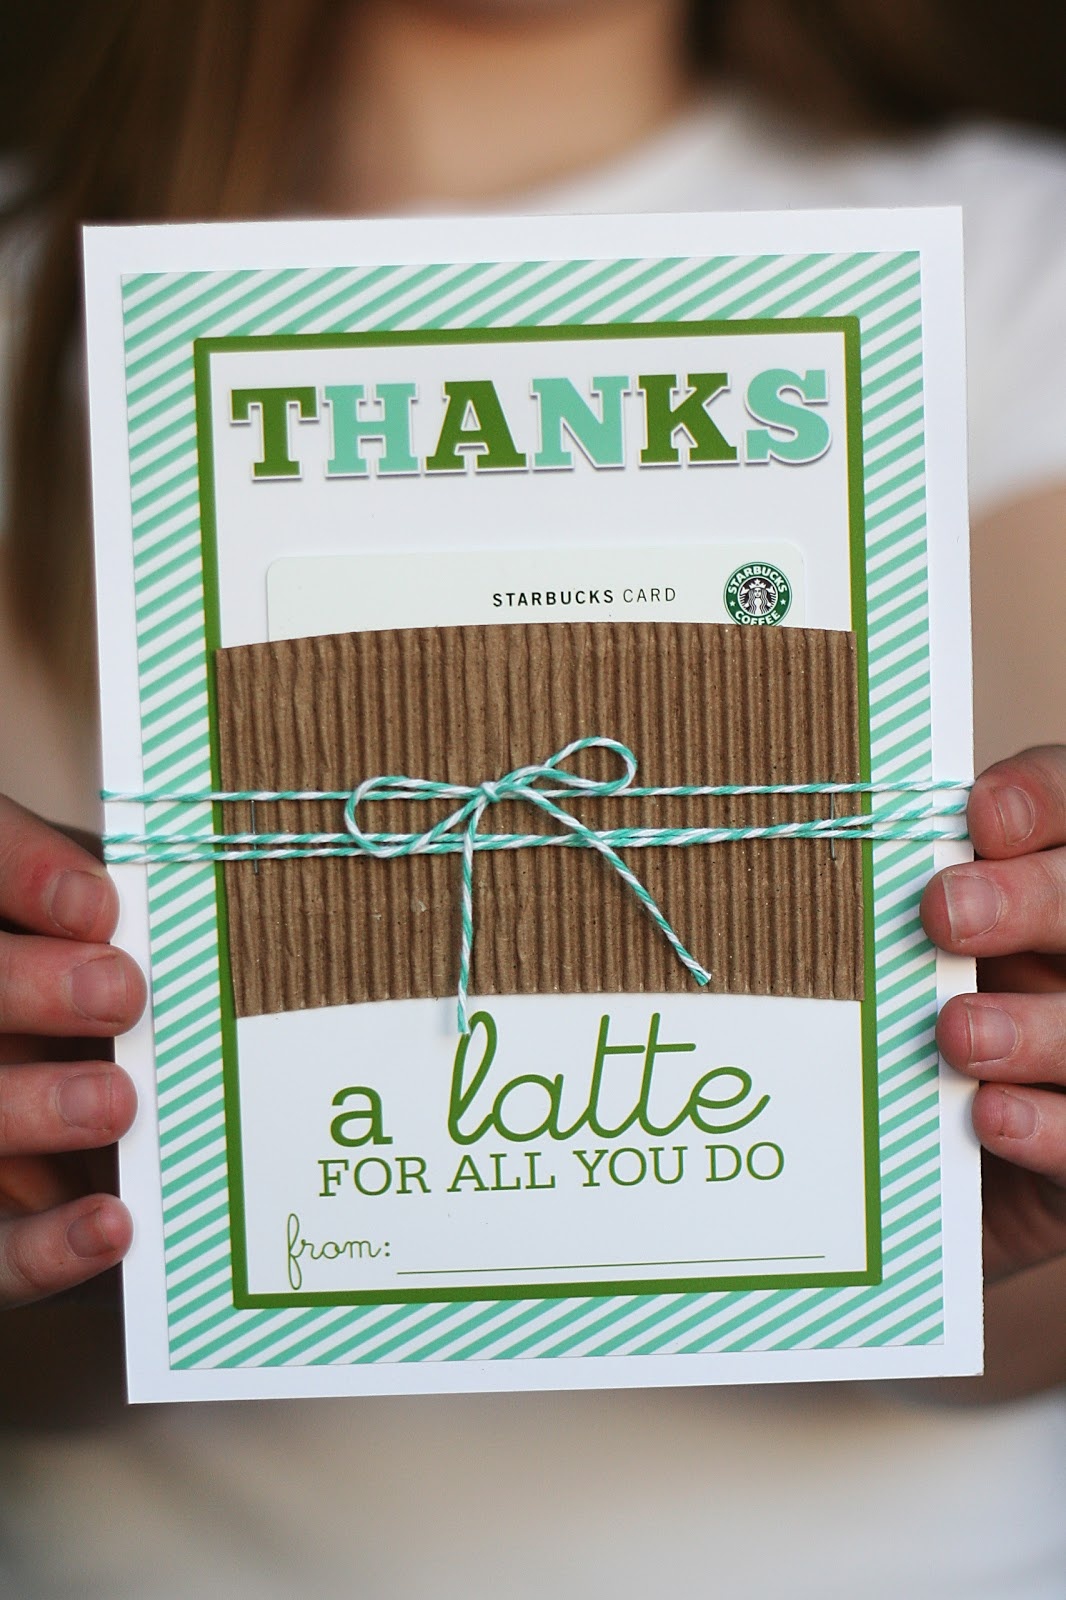 Thanks A Latte Card You Can Print For Free | Eighteen25 - Administrative Professionals Cards Printable Free